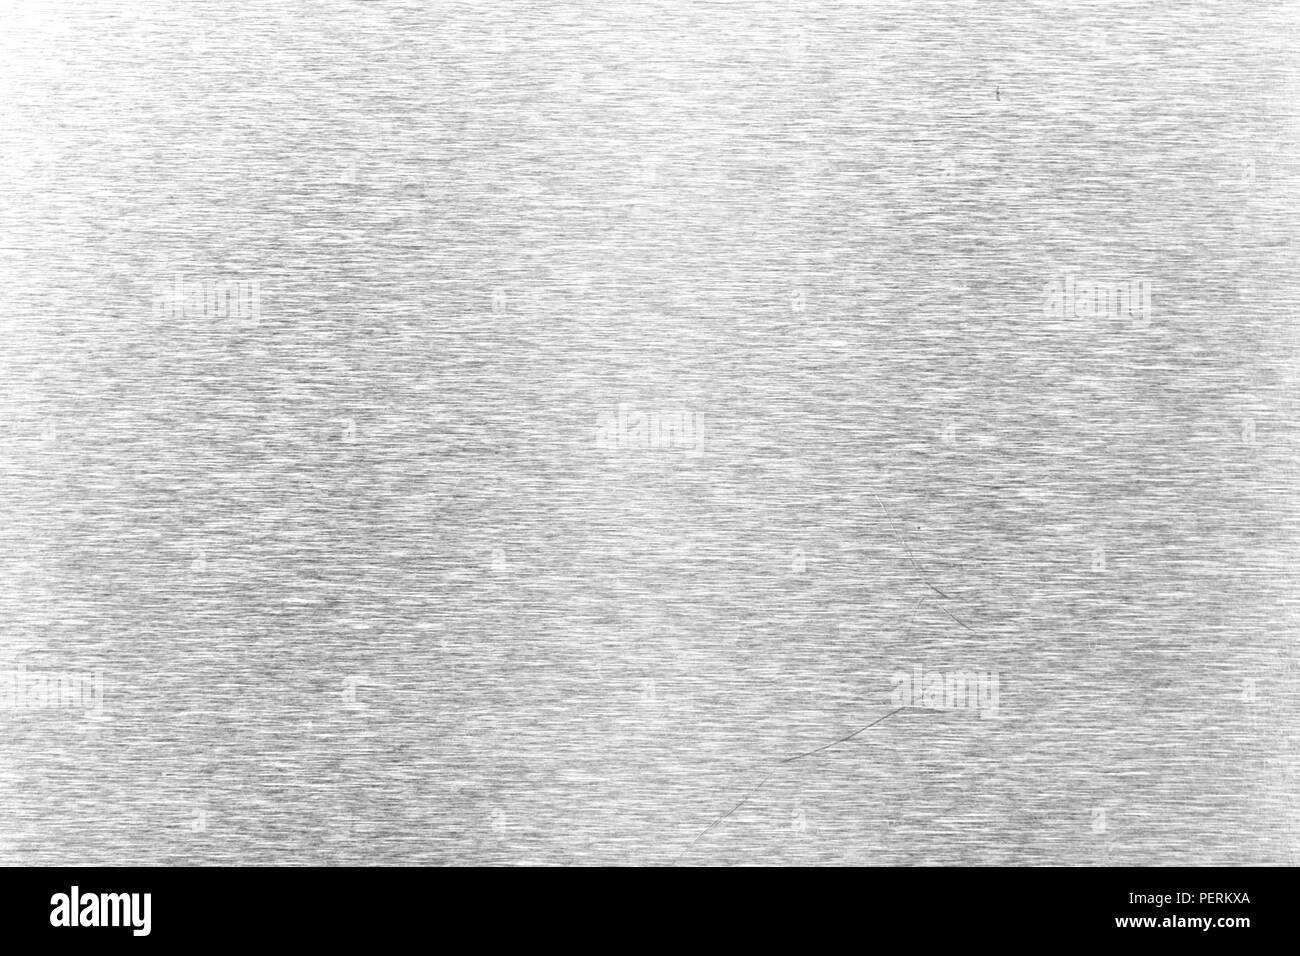 Shiny silver leaf gray foil texture background. Stock Photo